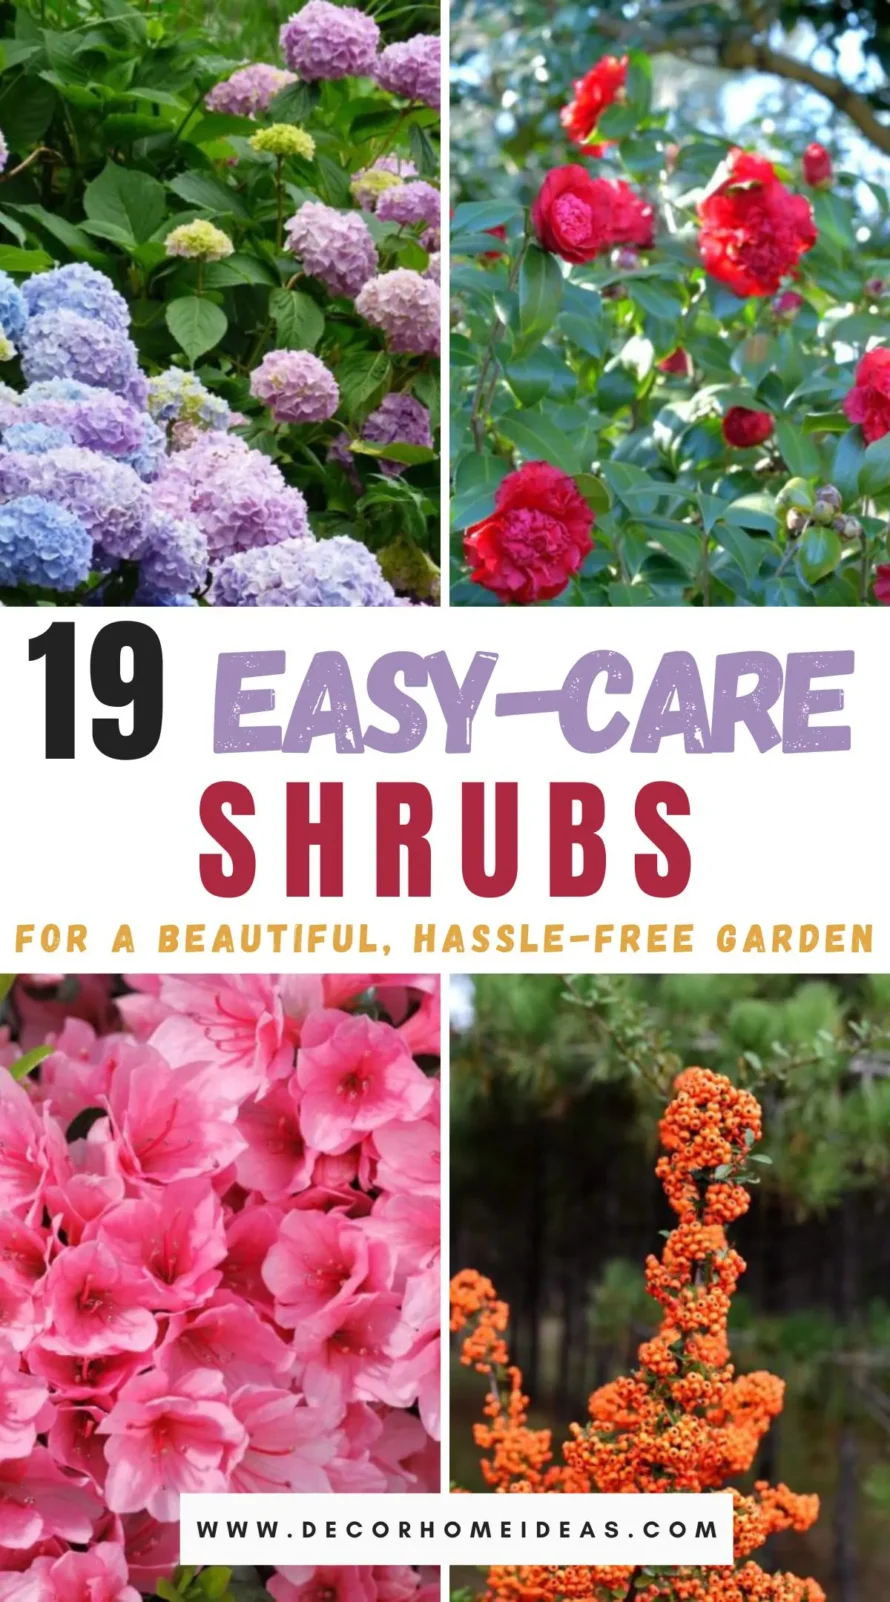 Transform your garden into an oasis of beauty with minimal effort! Discover 19 low-maintenance shrubs that are perfect for hassle-free gardening. From evergreens to flowering varieties, these resilient plants require little care yet provide year-round interest. Ready to simplify your gardening routine? Find out which shrubs make the cut!